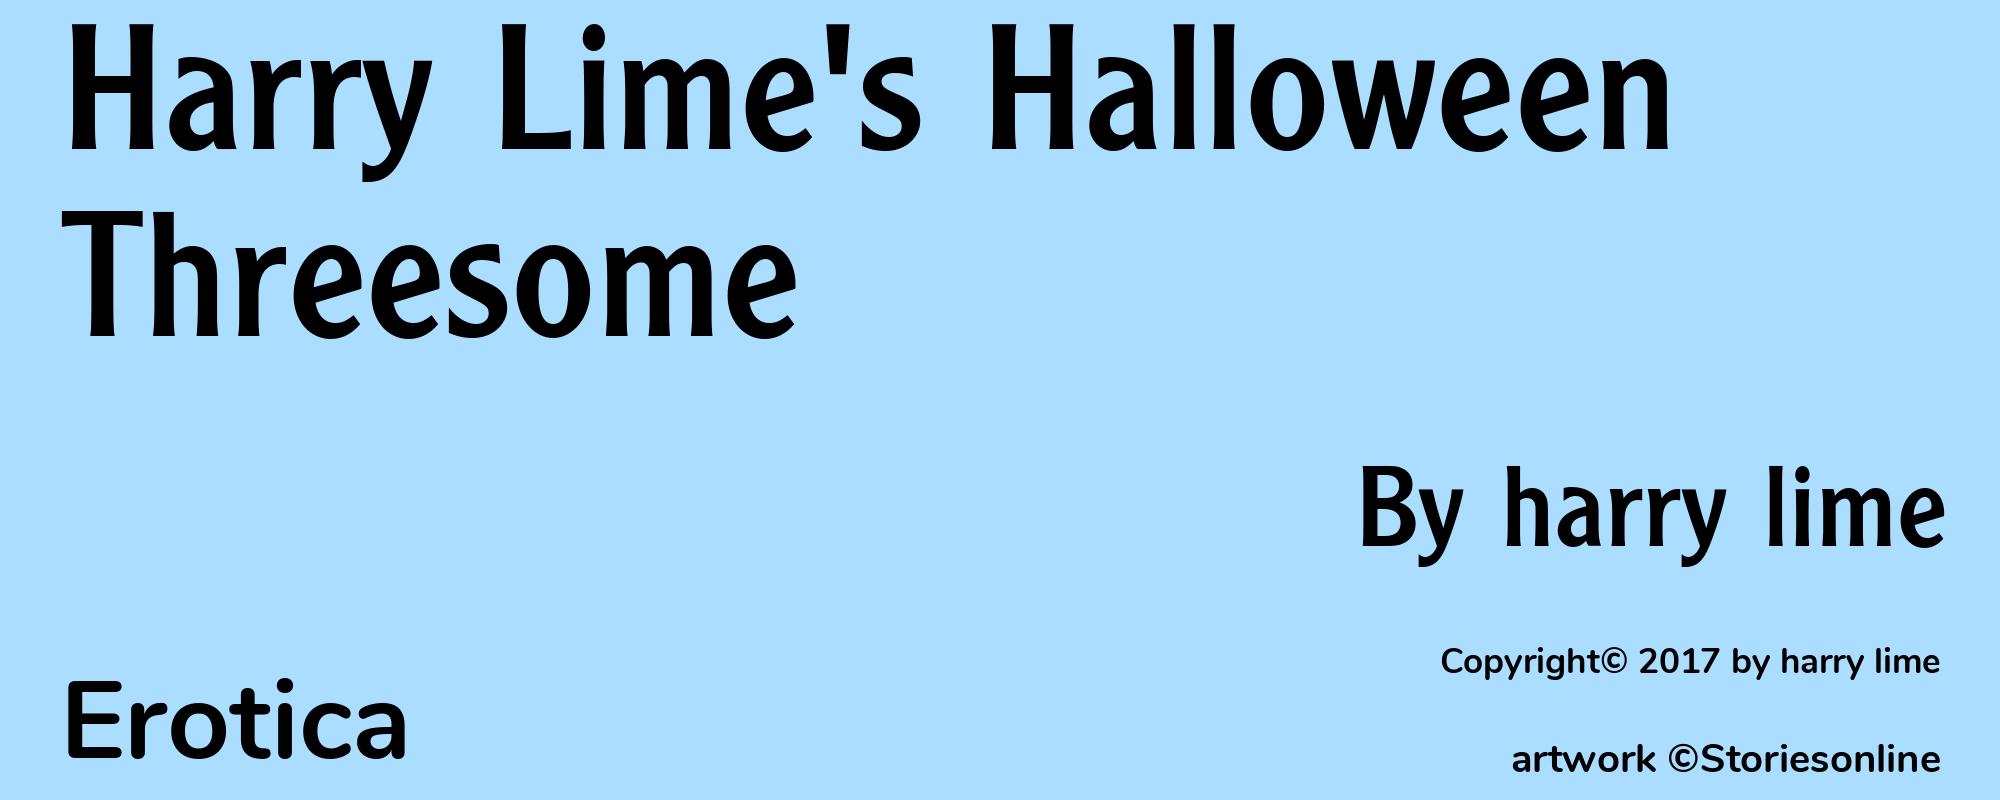 Harry Lime's Halloween Threesome - Cover